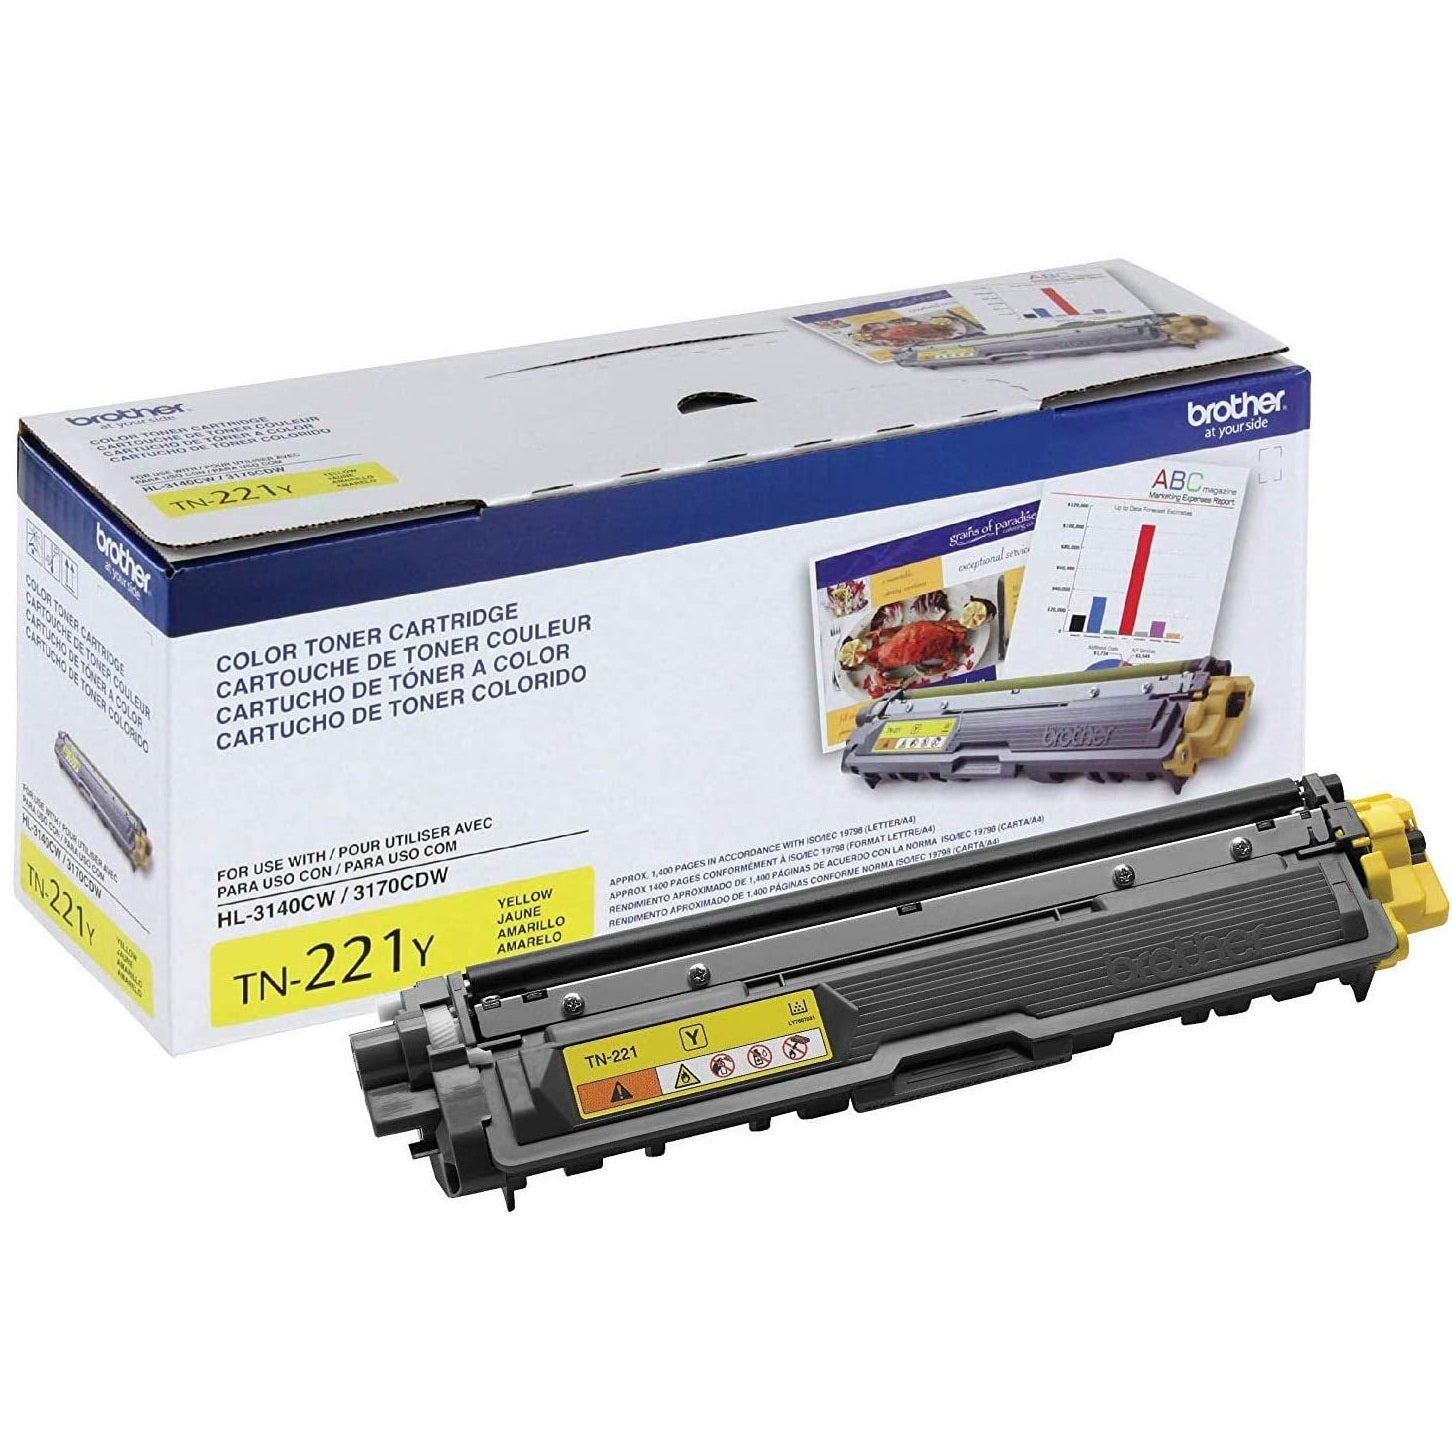 Absolute Toner Brother Genuine OEM TN221Y Yellow Yield Toner Cartridge | 1,400 Pages Yield Original Brother Cartridges